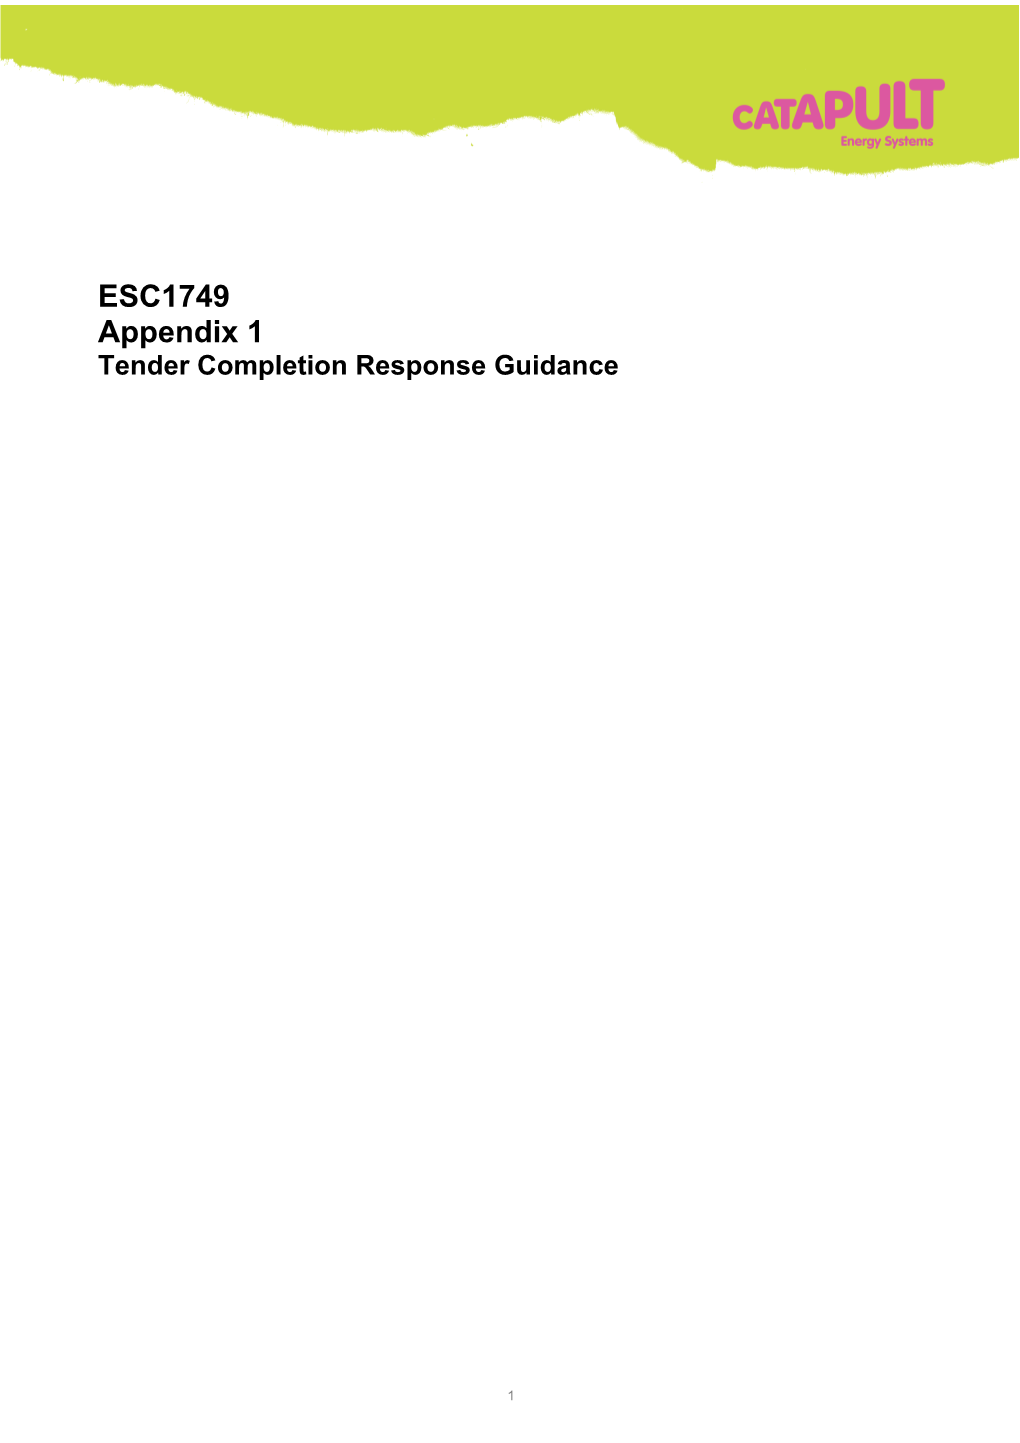 Tender Completion Response Guidance